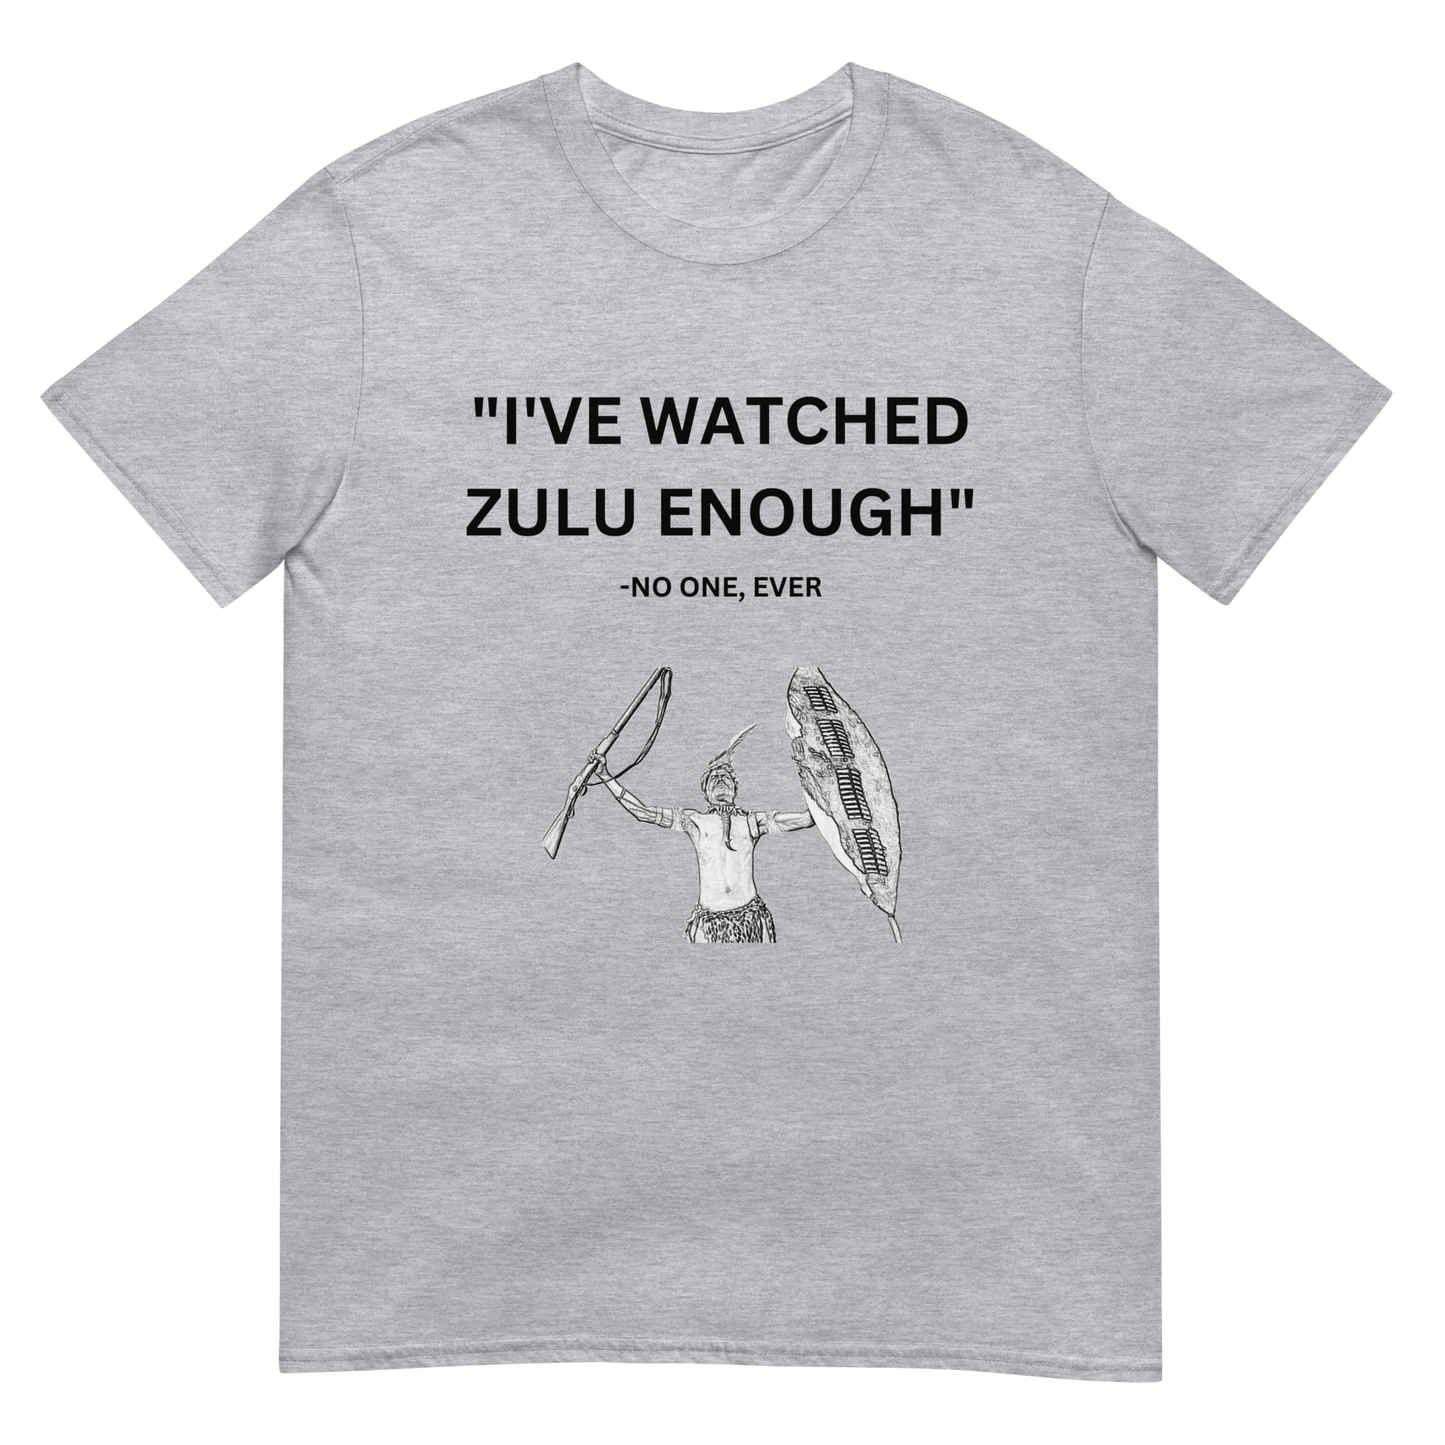 "I've Watched Zulu Enough" - No One Ever (t-shirt)